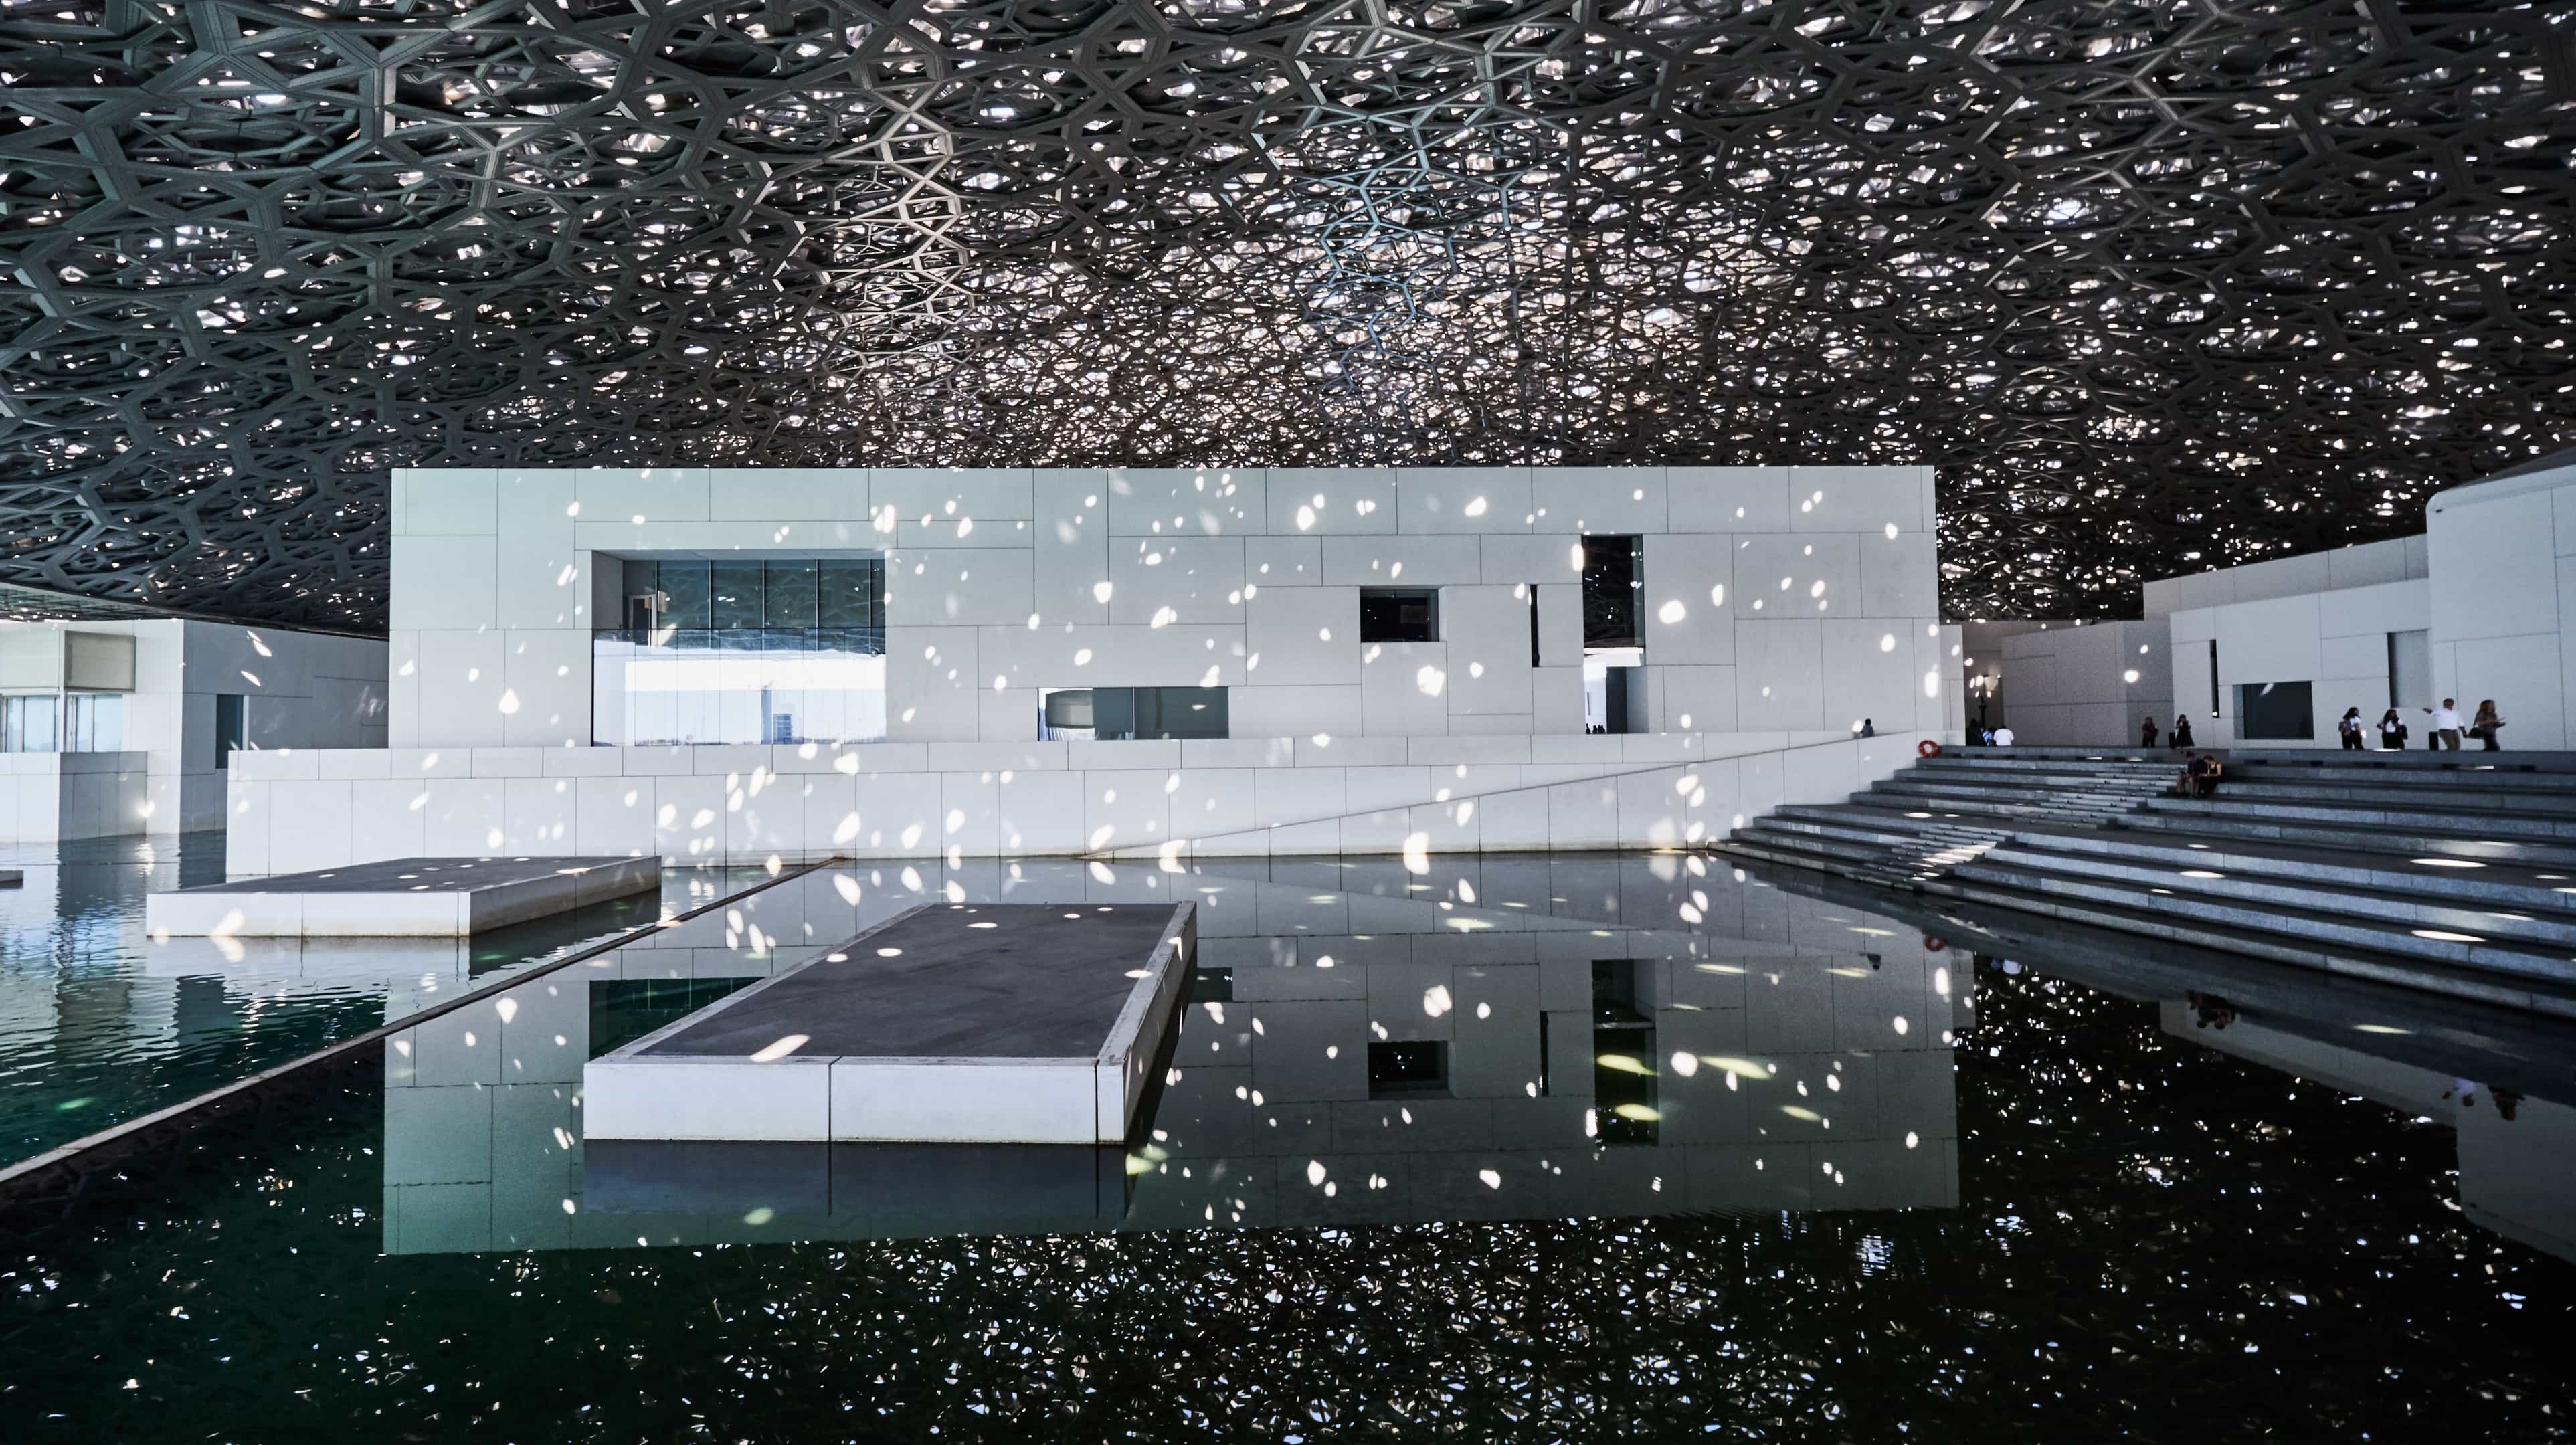 Sunshine creating patterns of light in the exernal seating area of Louvre Abu Dhabi